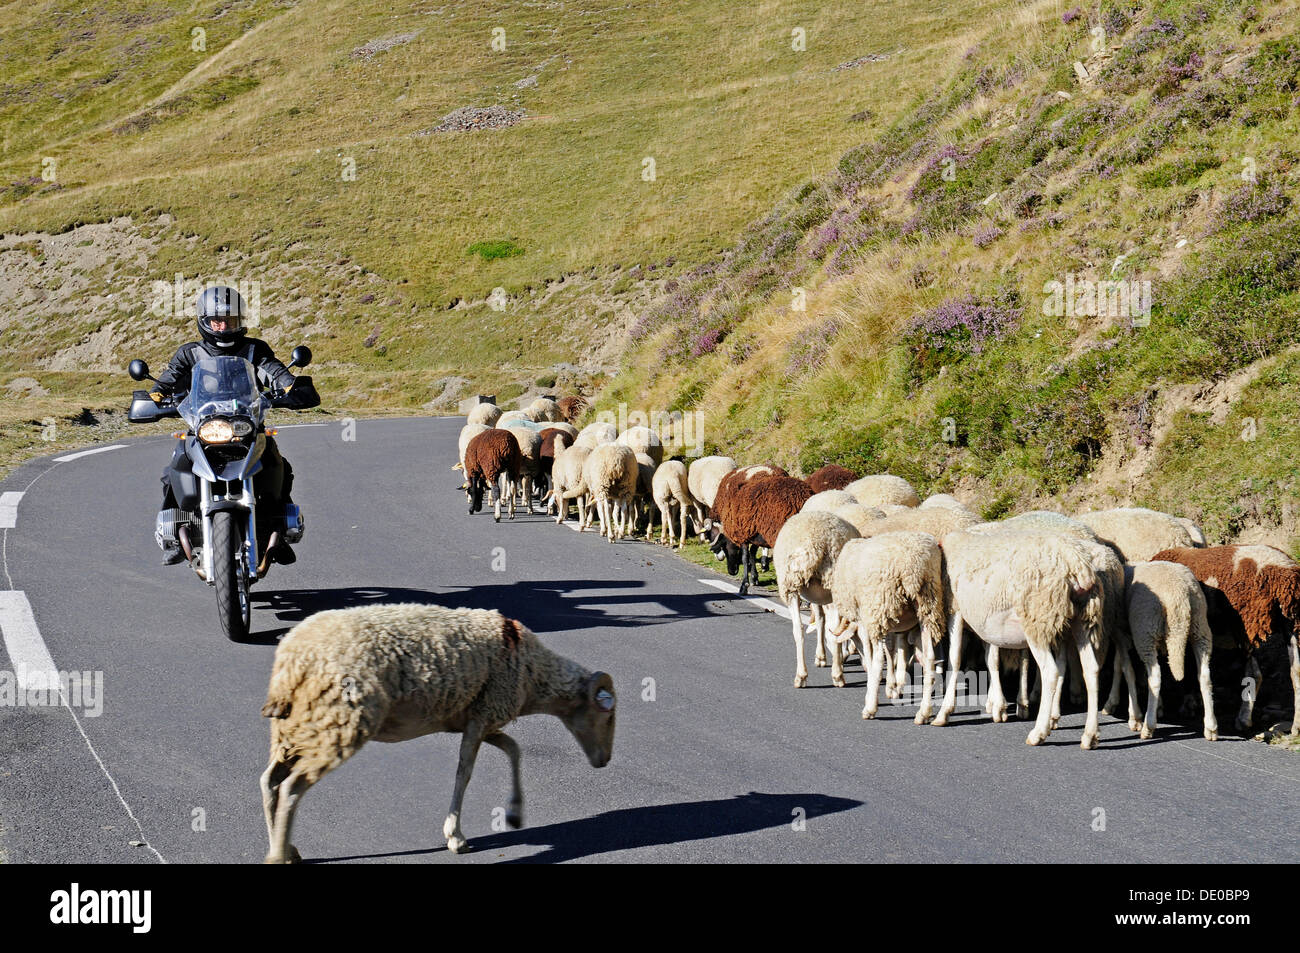 Motorcyclist driving on a road with sheep, Col du Tourmalet mountain pass road, mountains, Bareges, Midi-Pyrénées, Pyrenees Stock Photo